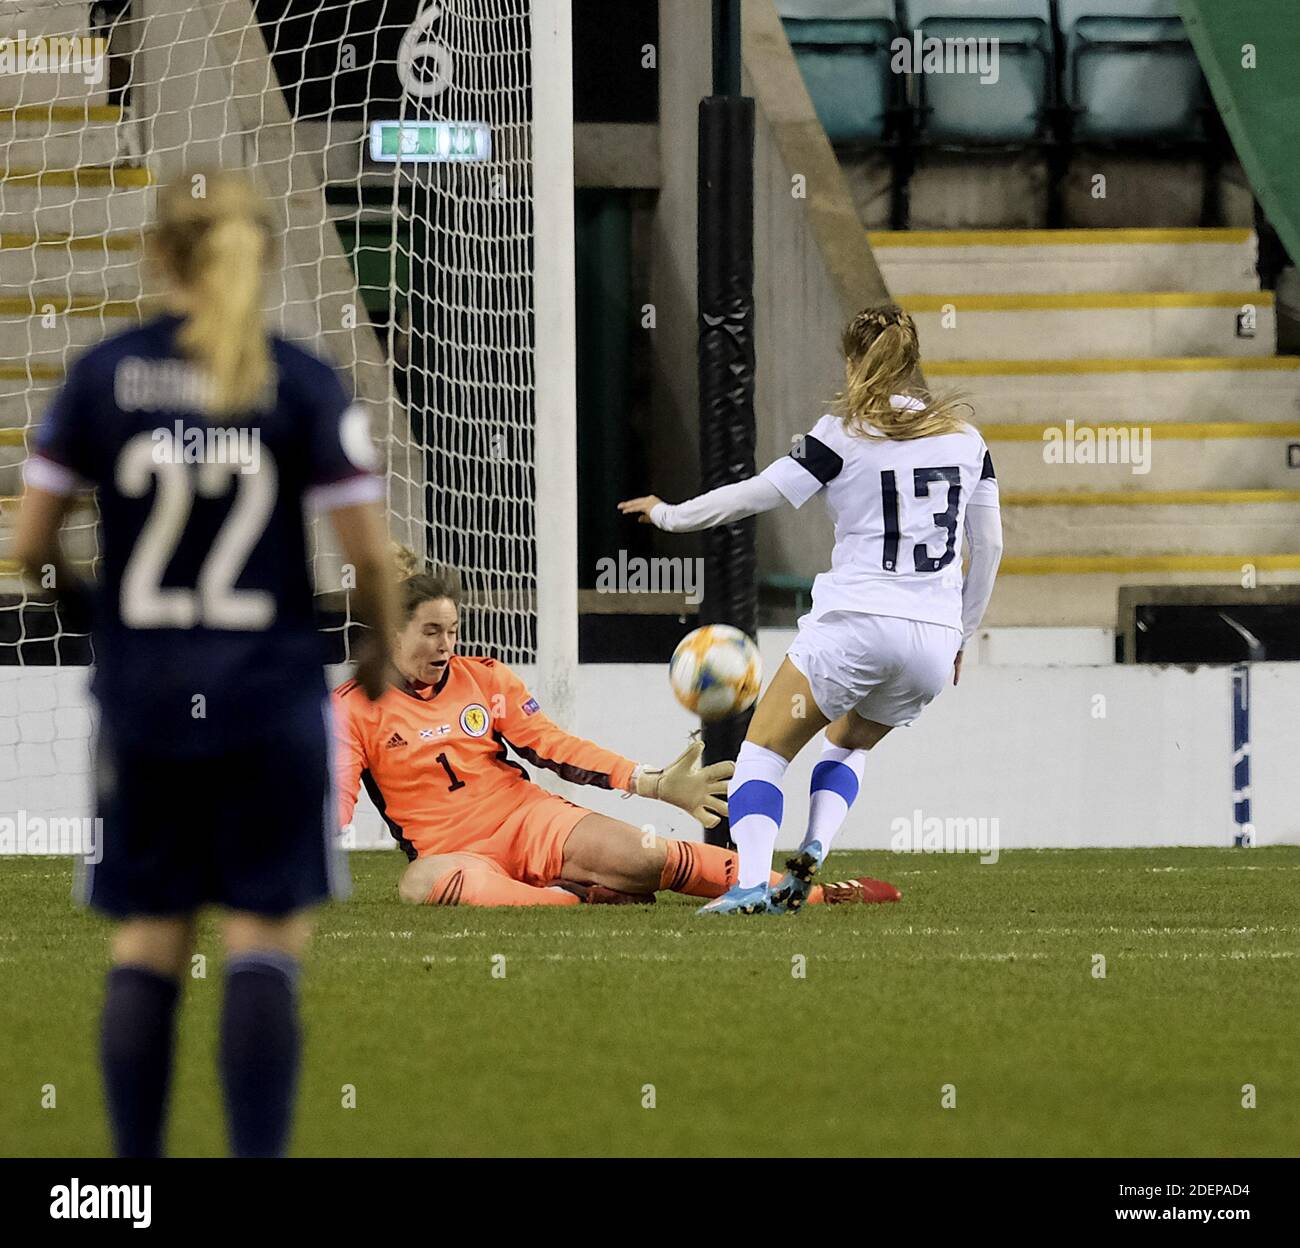 Edinburgh, UK. 01st Dec, 2020. Amanda Rantanen of Finland scores when the  ball rebounded off her face to make it 0-1 in the last minute during the  UEFA Women's EURO 2022 Qualifying